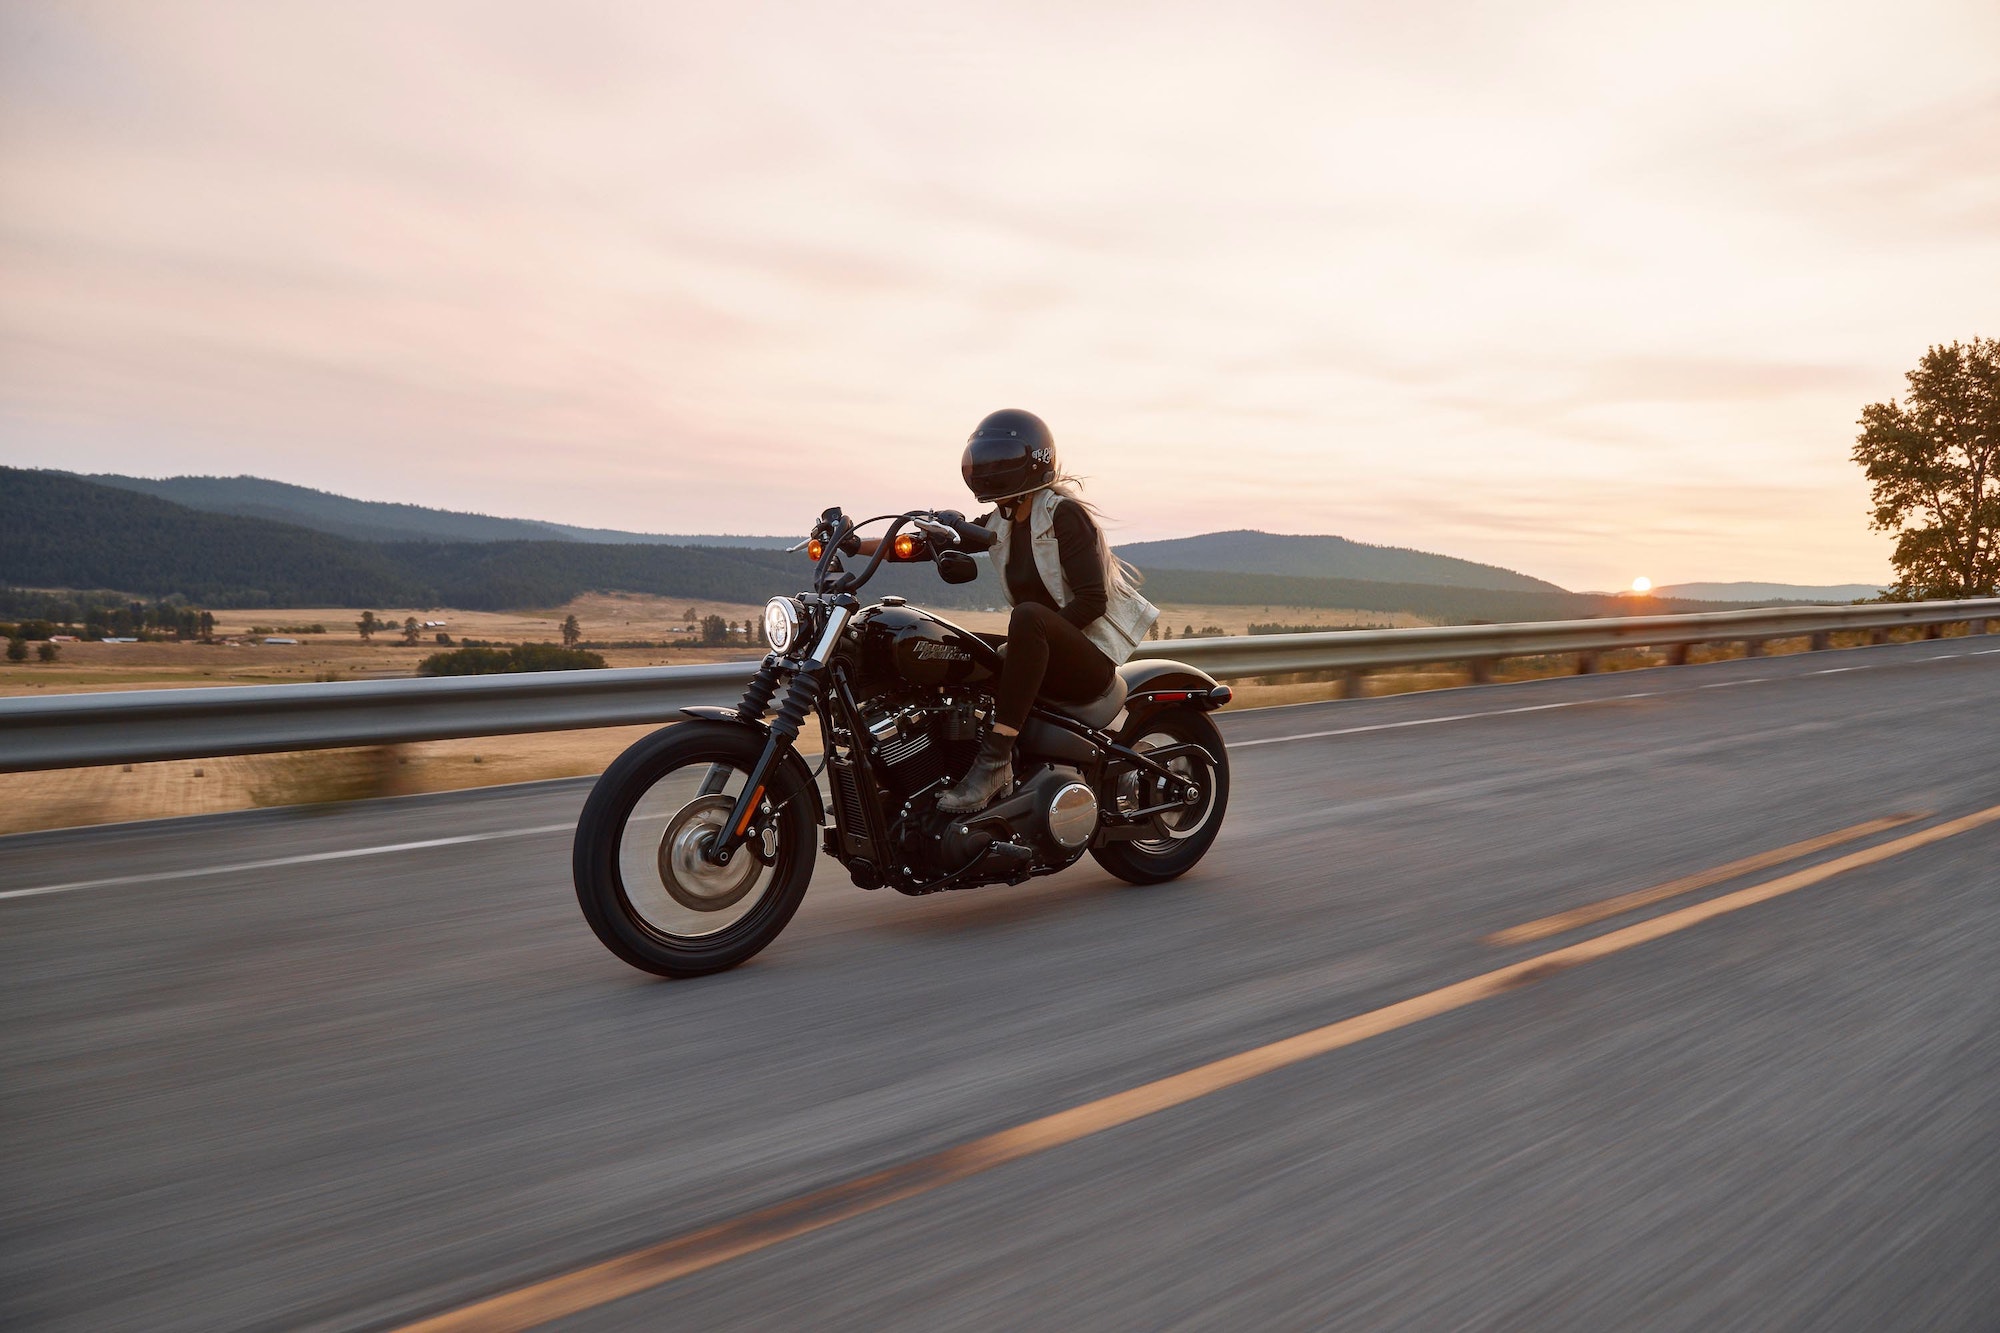 The Top Causes Of Motorcycle Accidents